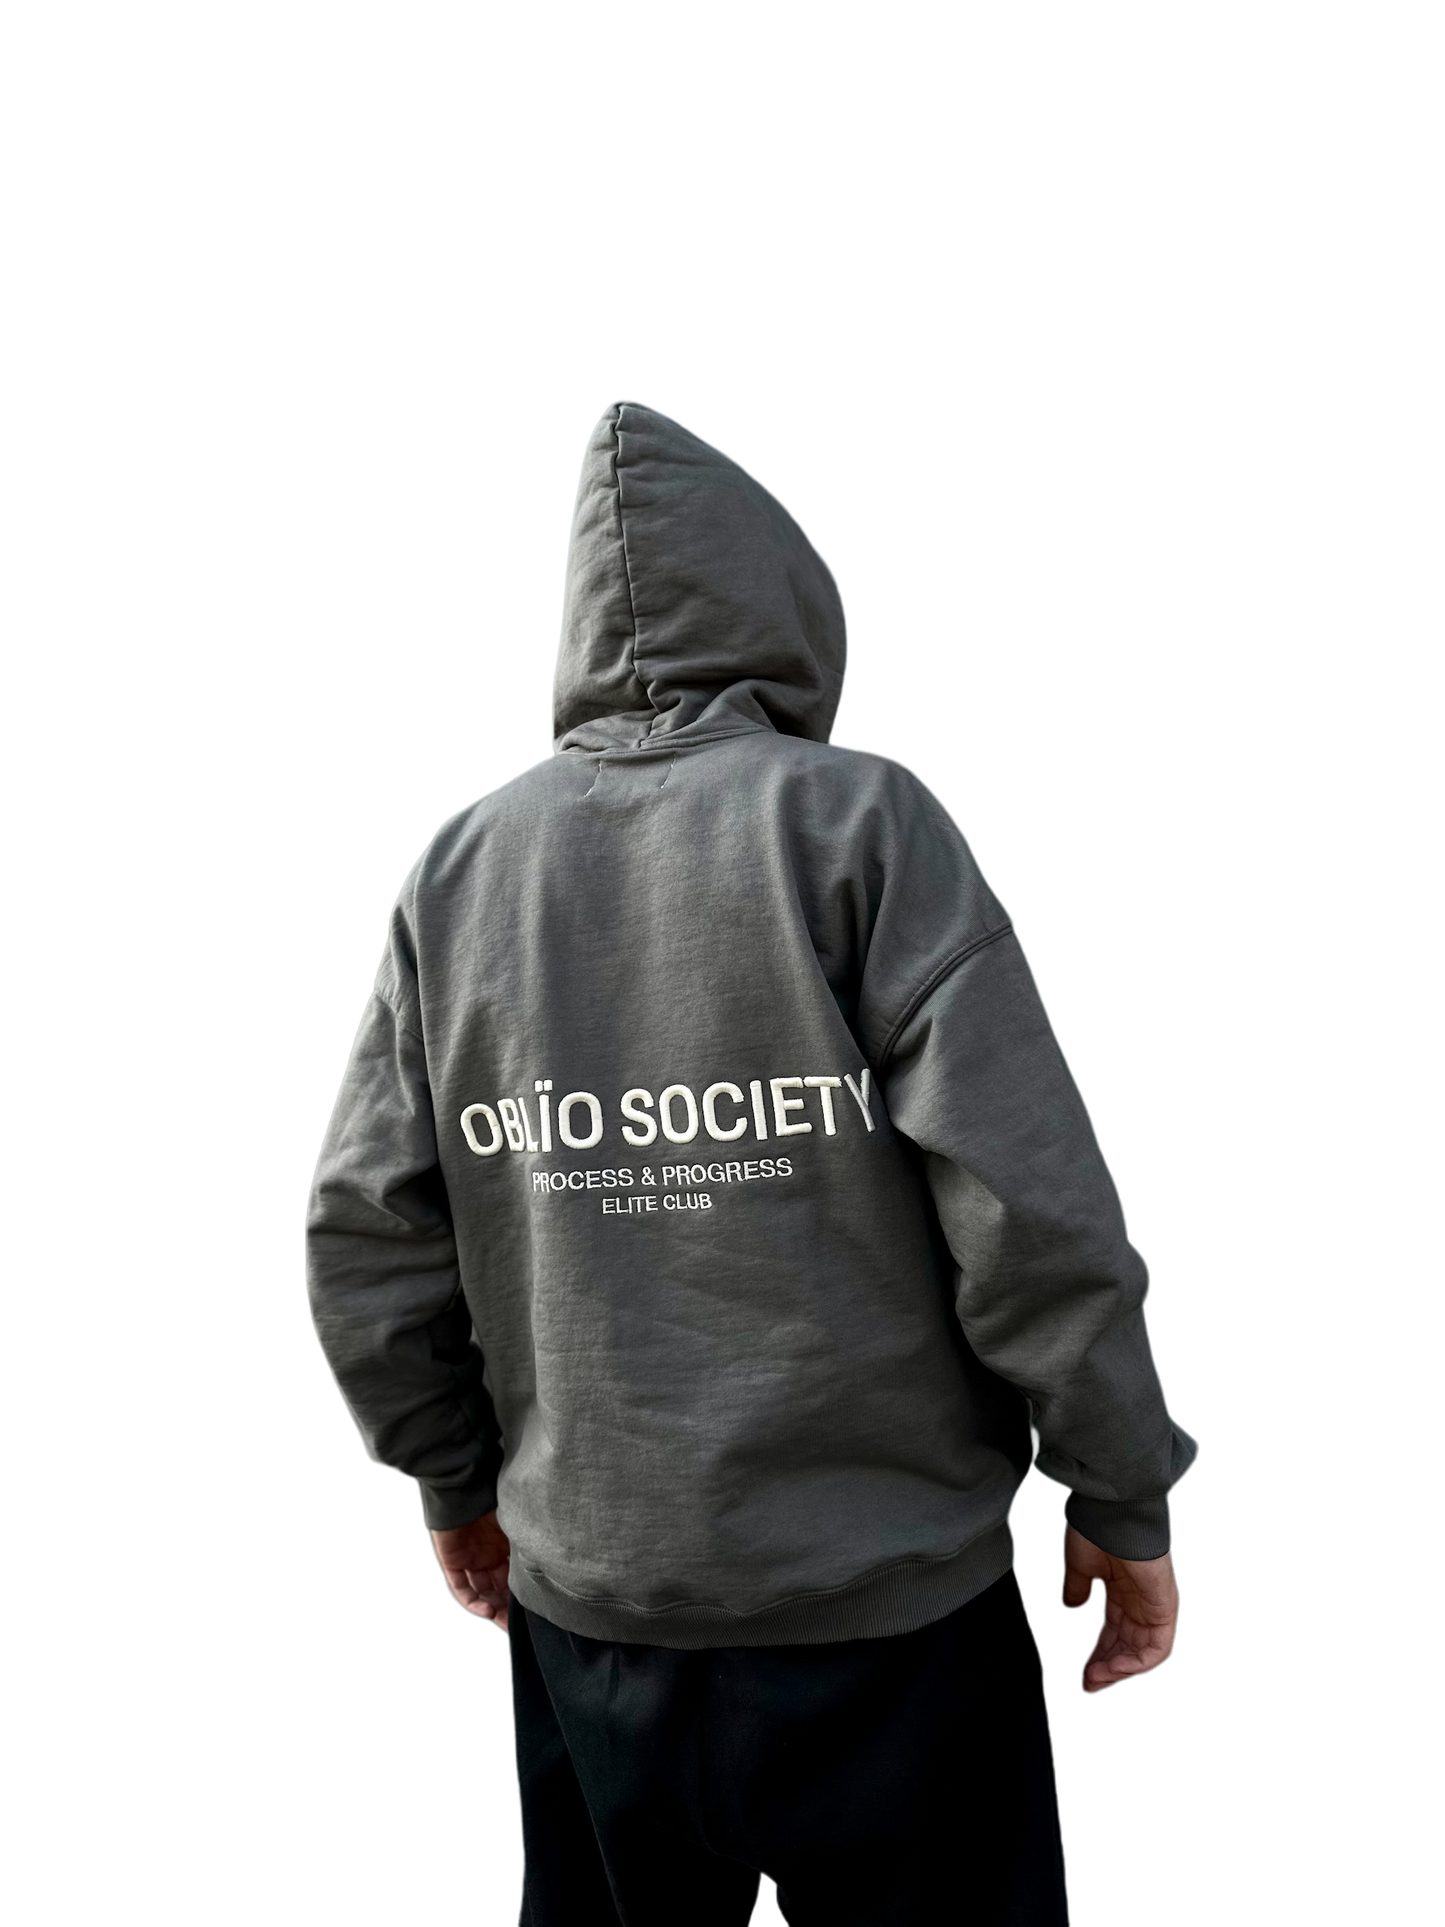 OBLIO SOCIETY Slate Hand Washed 3d Embroidery Hoodie